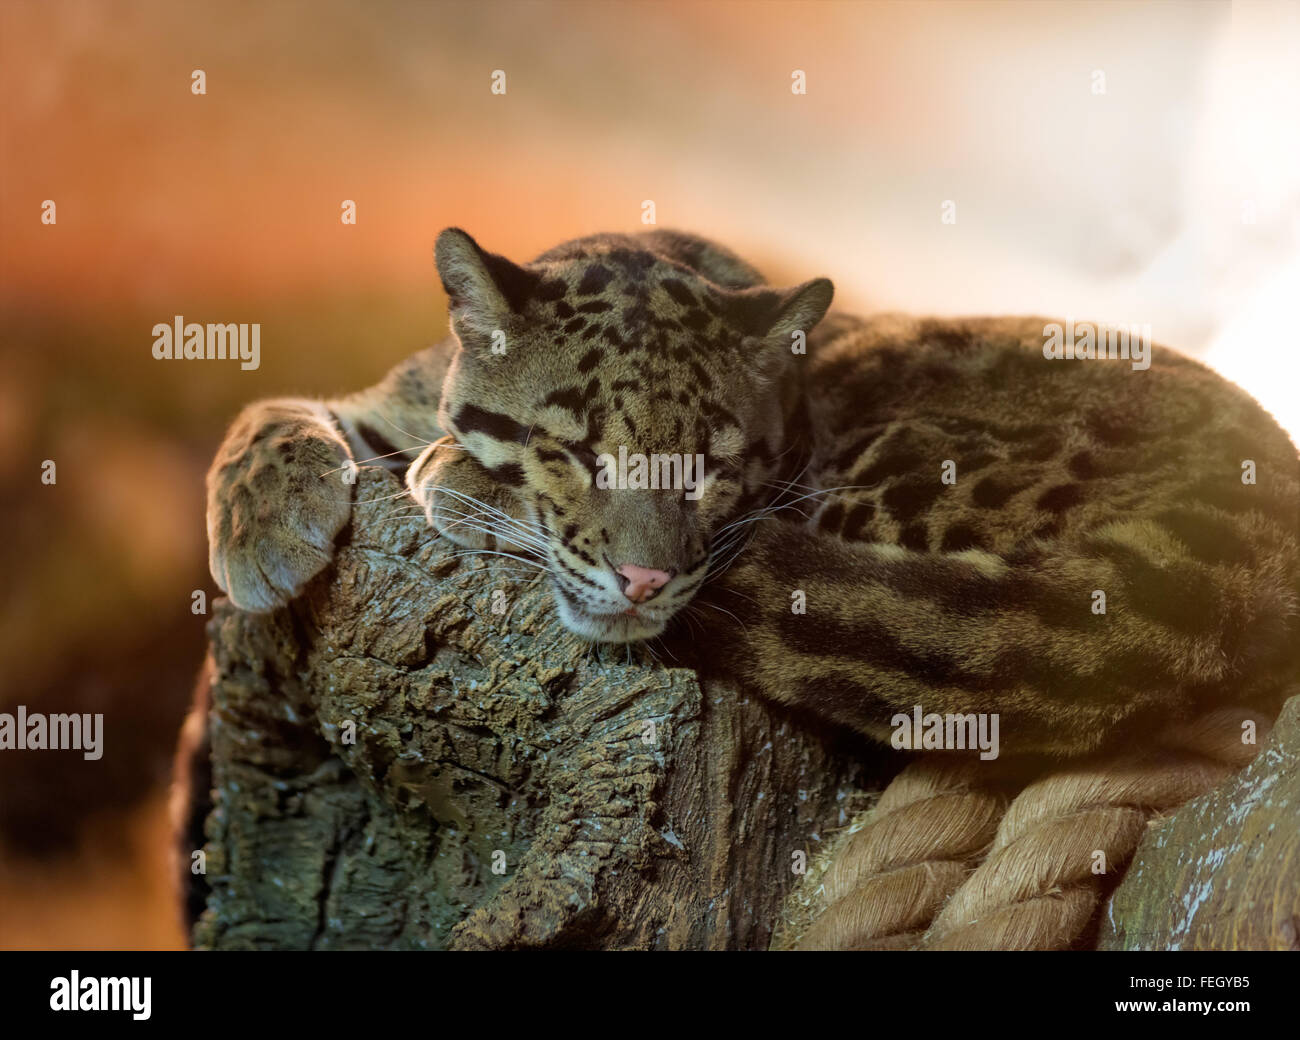 Animals: young clouded leopard (Neofelis nebulosa) having a rest Stock Photo